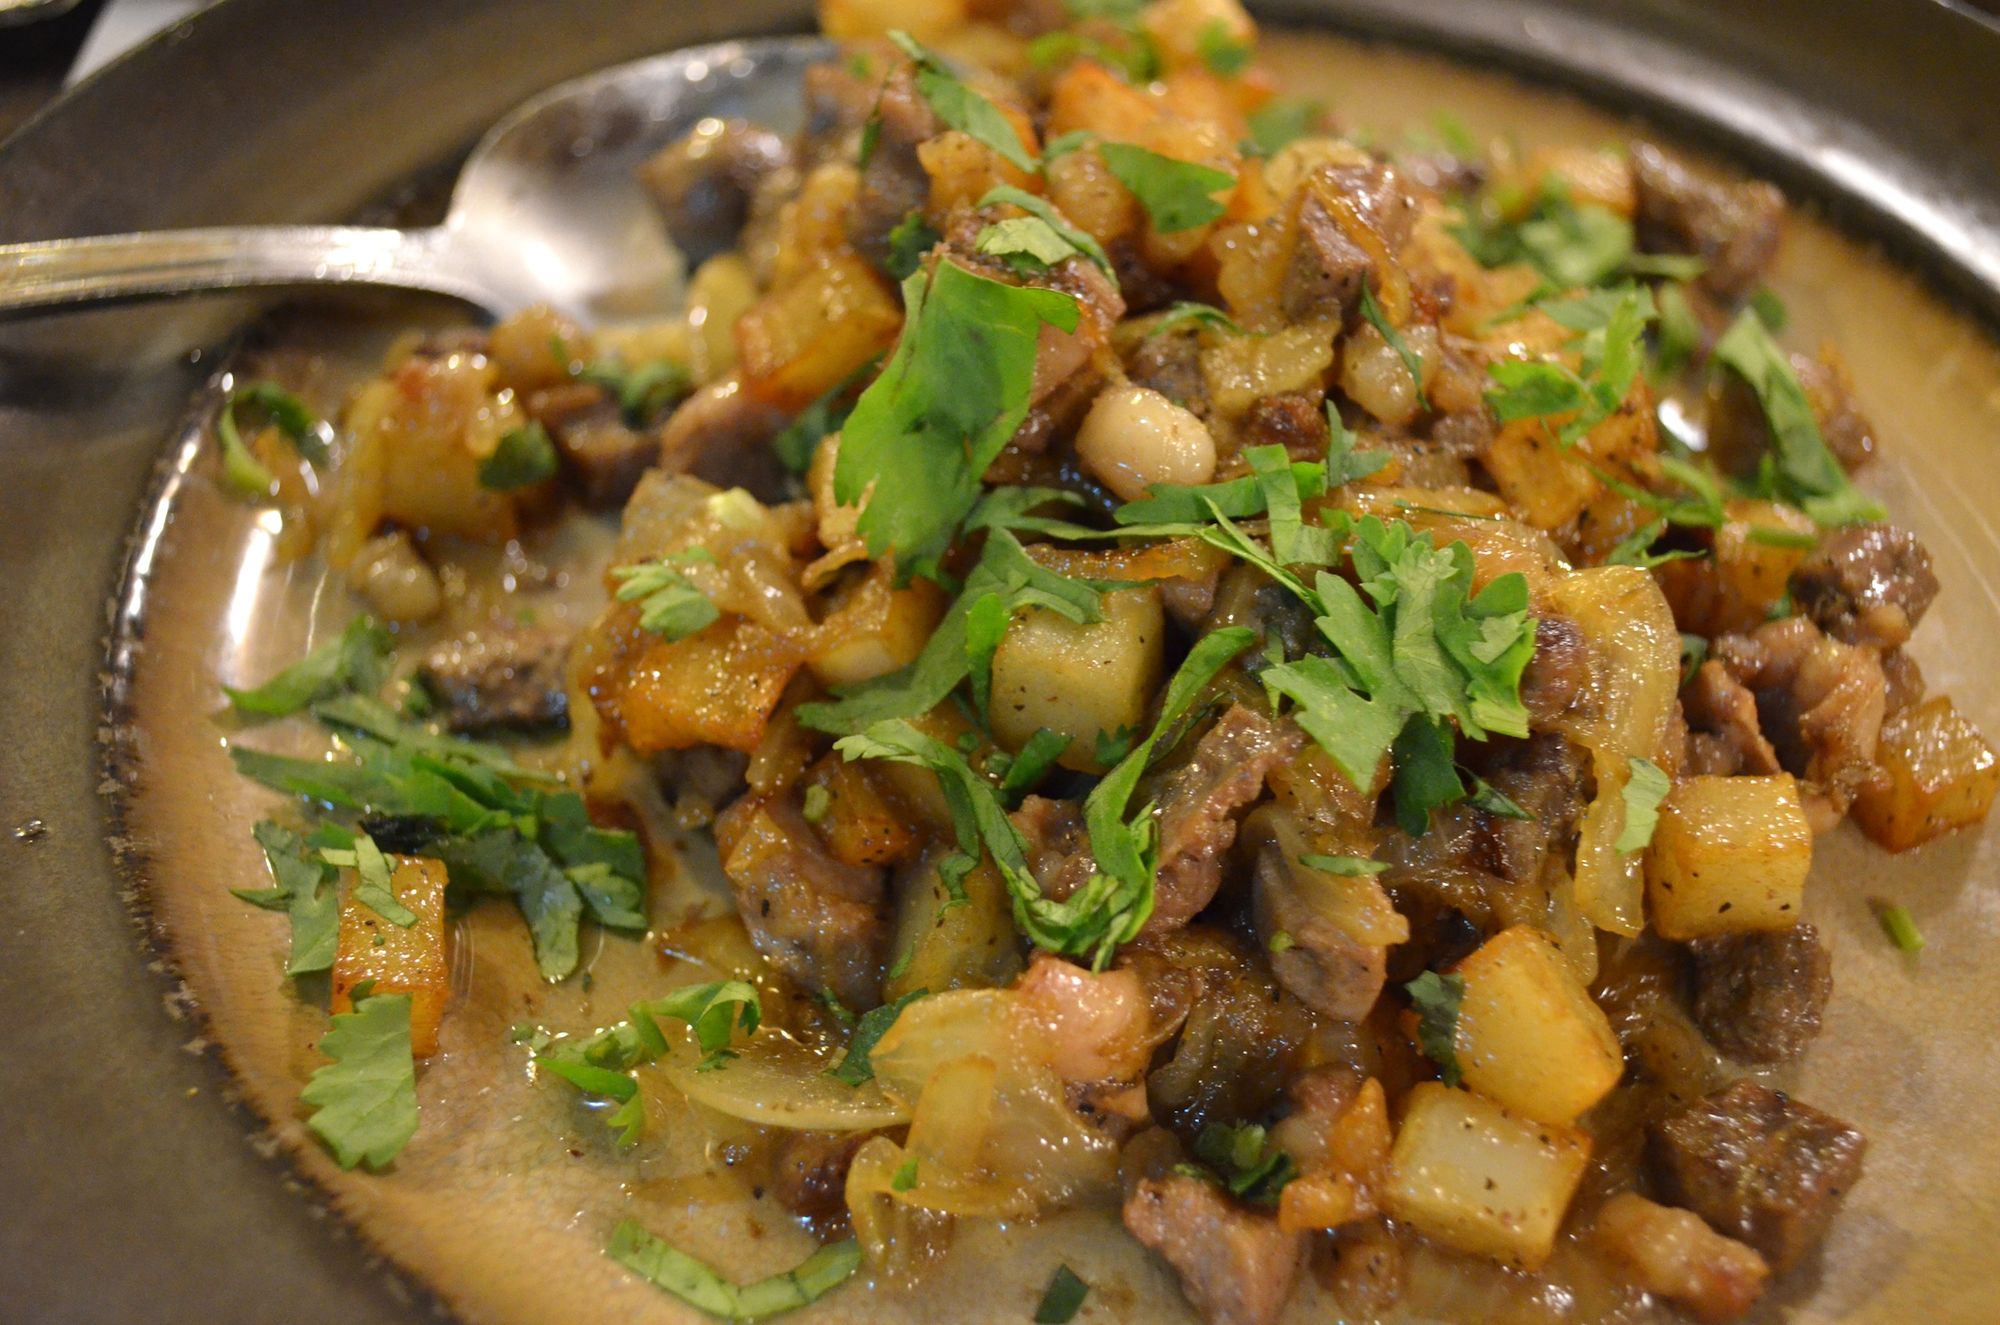 The Bite: Village Cafe’s Deliciously ‘Offal’ Food — Sheep Testicles, Liver, Heart & Kidneys